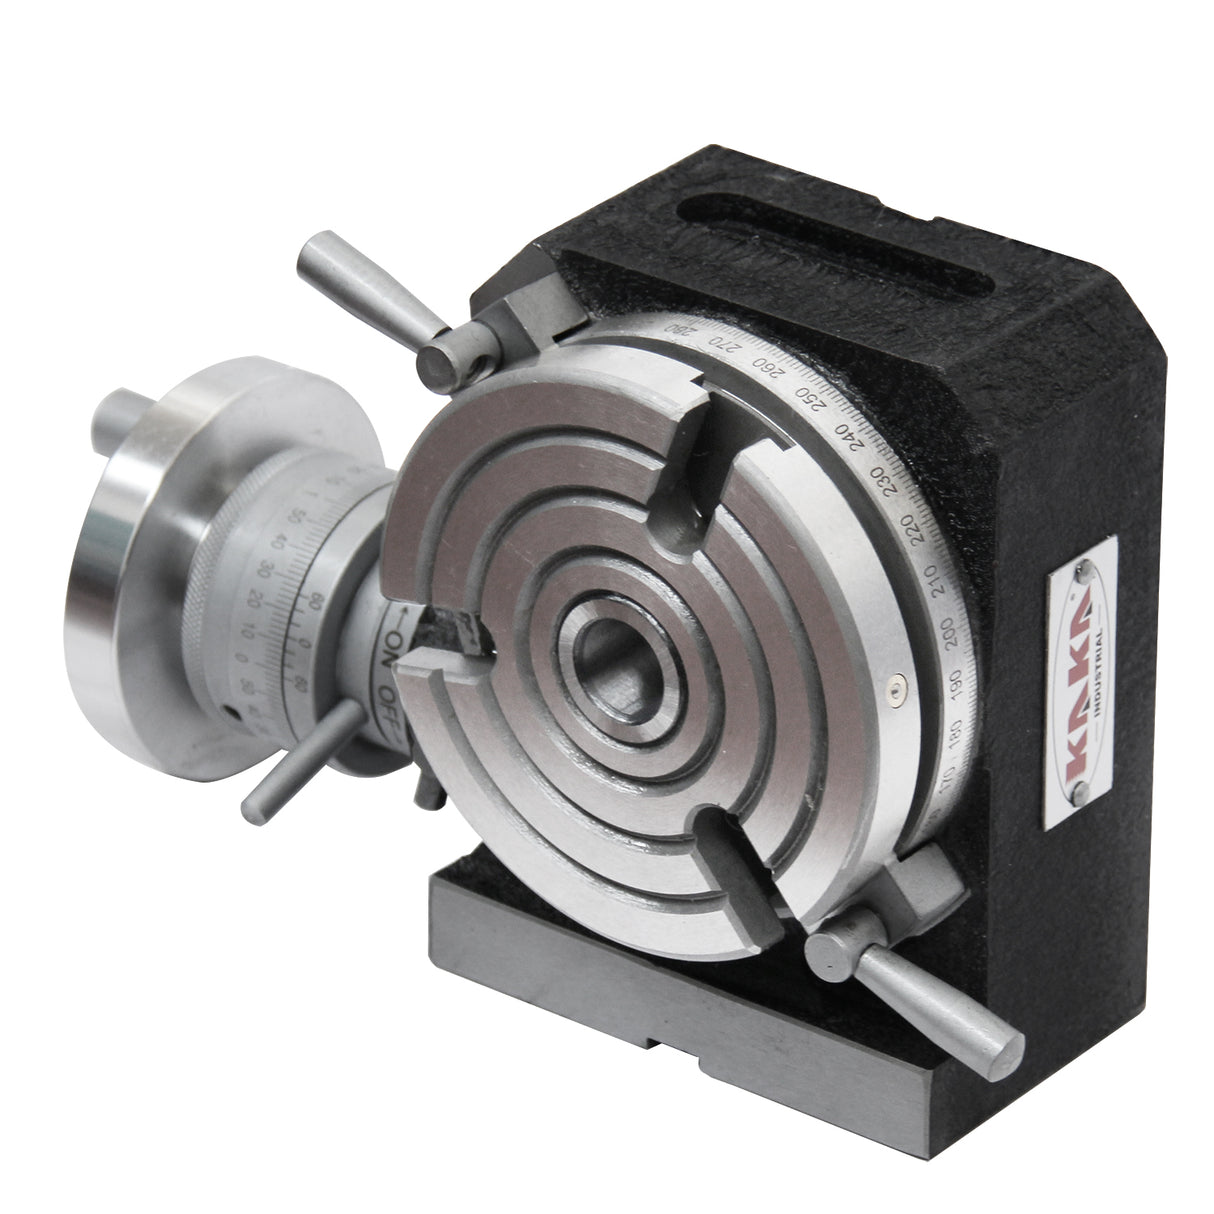 Precision Machining: 360° rotary table with 0.314" T-slot width for accurate and smooth cuts.